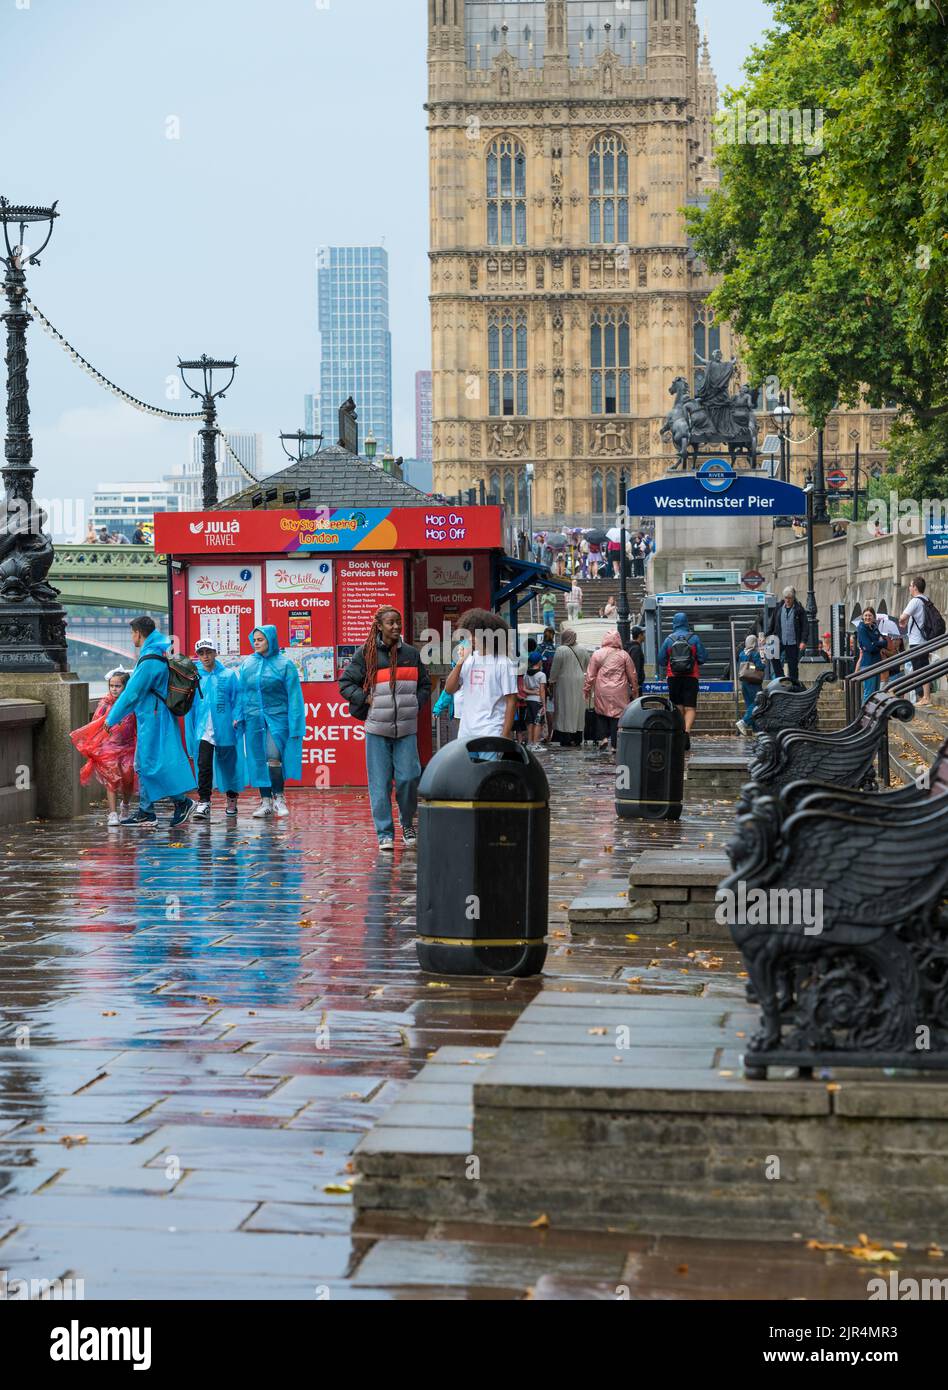 Tourists and sightseers at the tour ticket sales booths on a rainy day at Westminster Pier. London, England, UK. Stock Photo